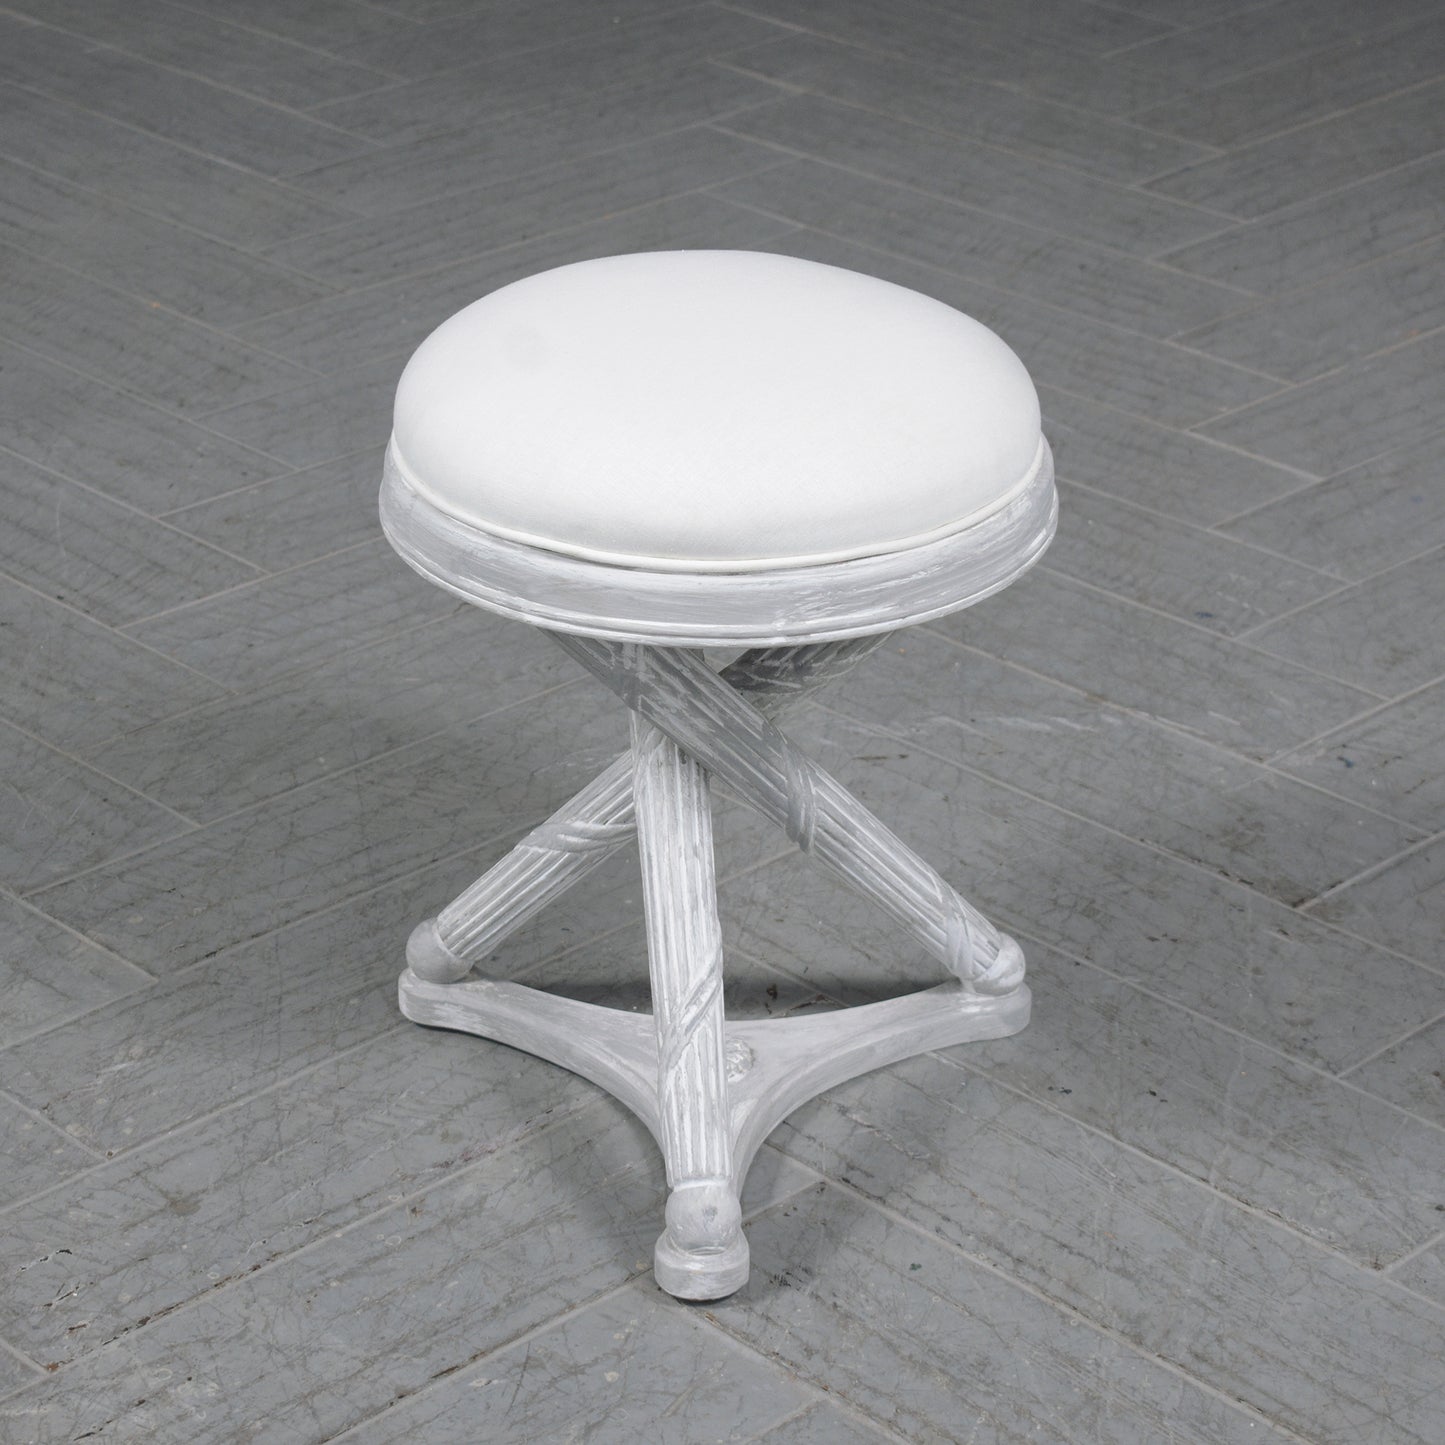 Restored Mid-Century Modern X-Base Stool in White & Gray with Linen Cushion